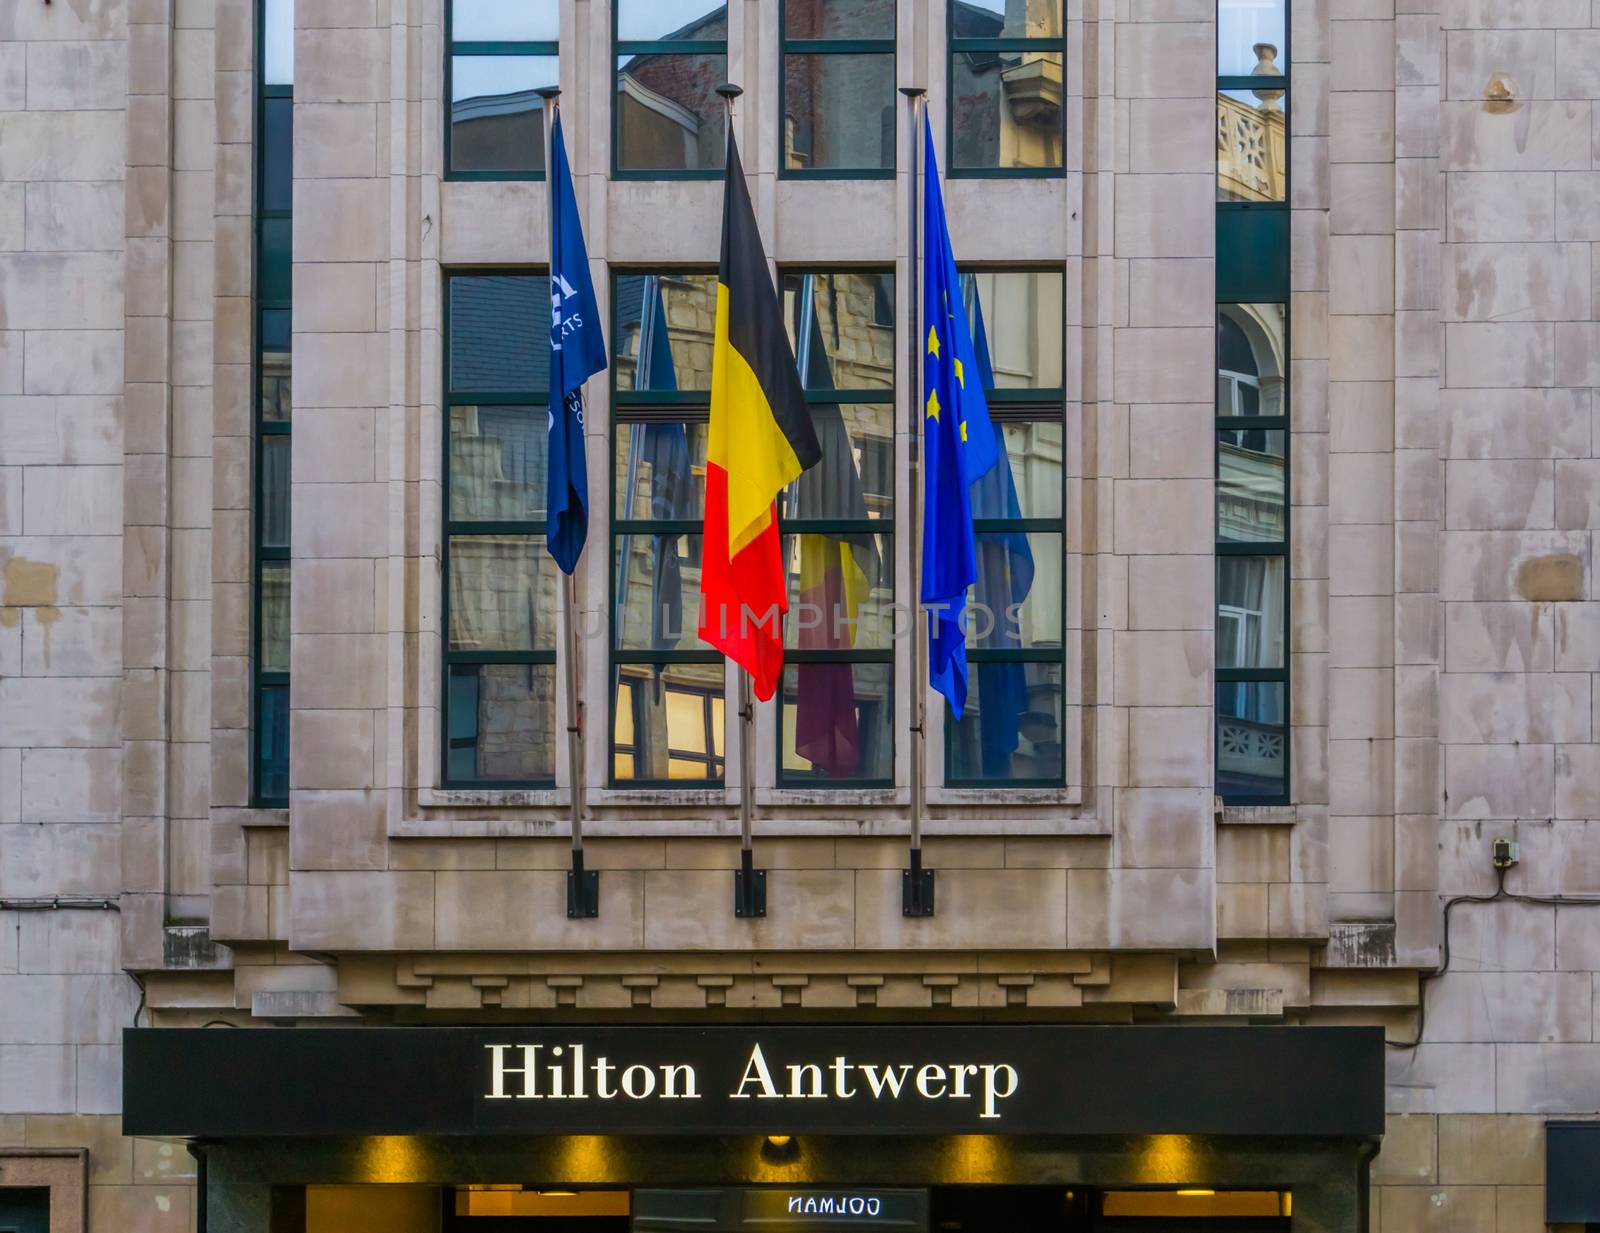 Antwerpen, Belgium, april 23, 2019, Sign board at the entrance of the Hilton hotel of Antwerp city by charlottebleijenberg